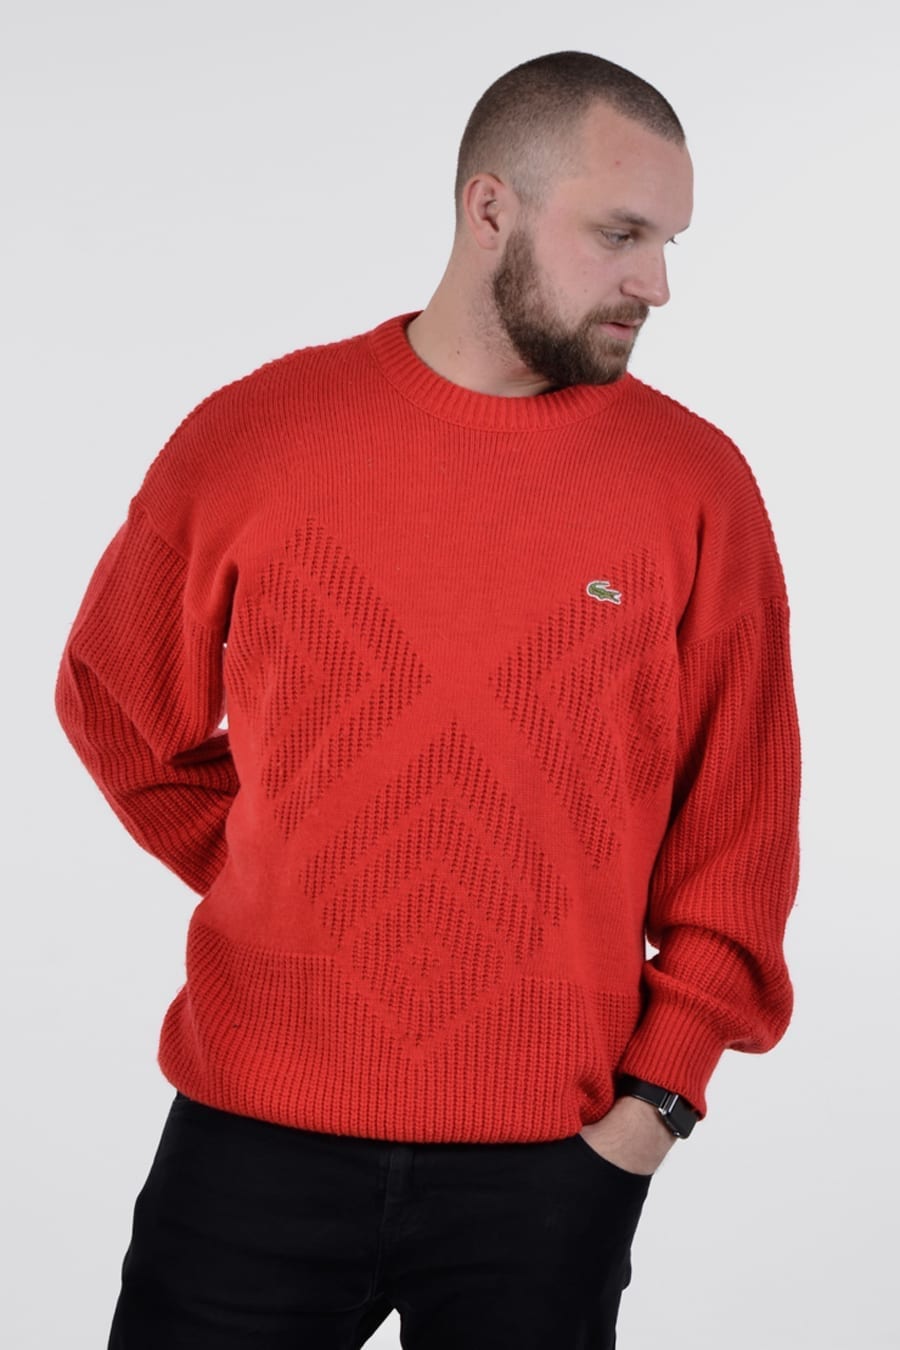 chemise lacoste sweater